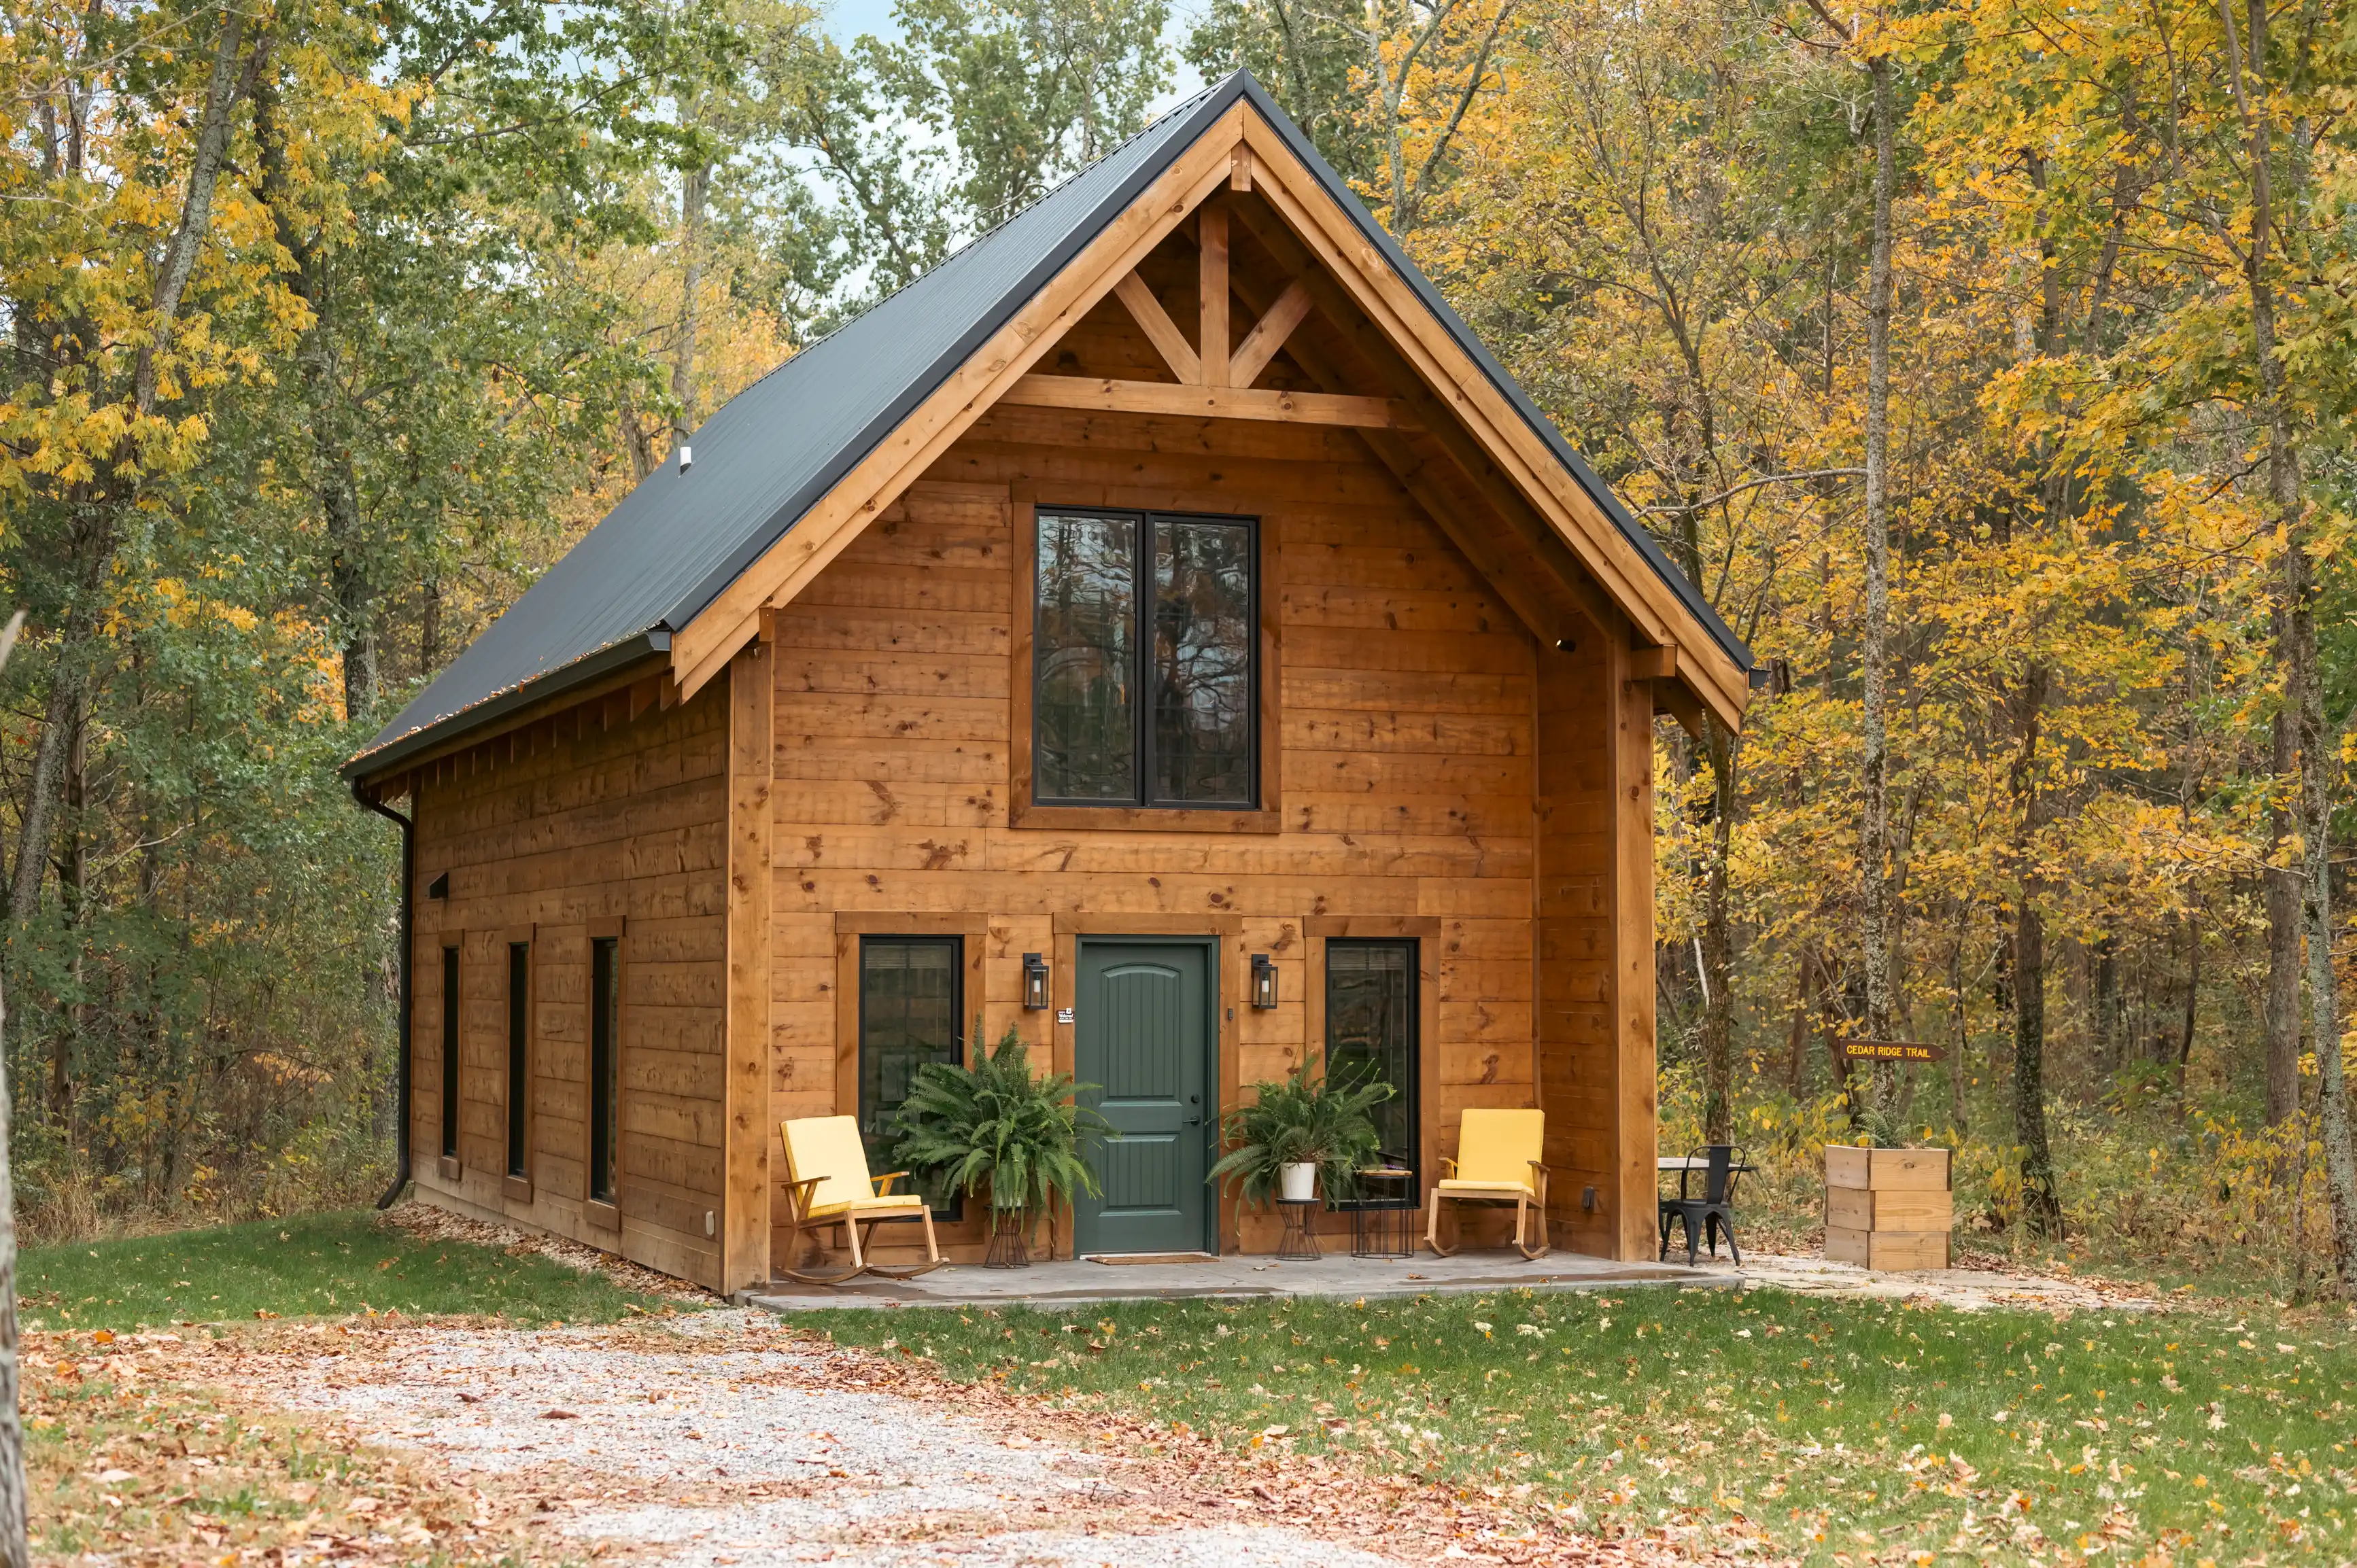 A wooden cabin with a gabled roof and a front porch surrounded by trees with autumn foliage.